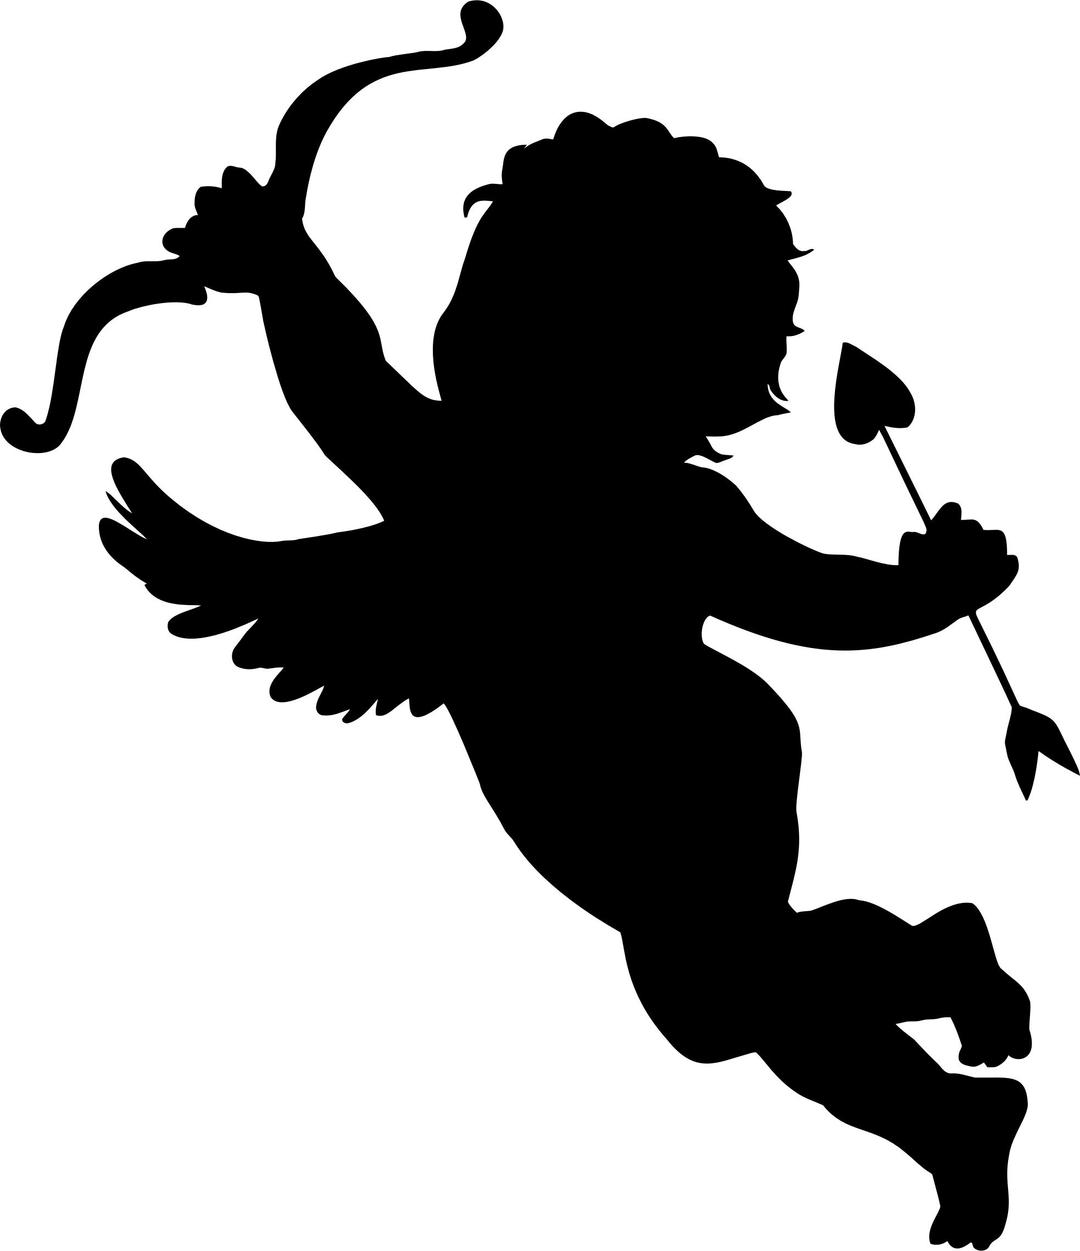 Cupid Silhouette png transparent